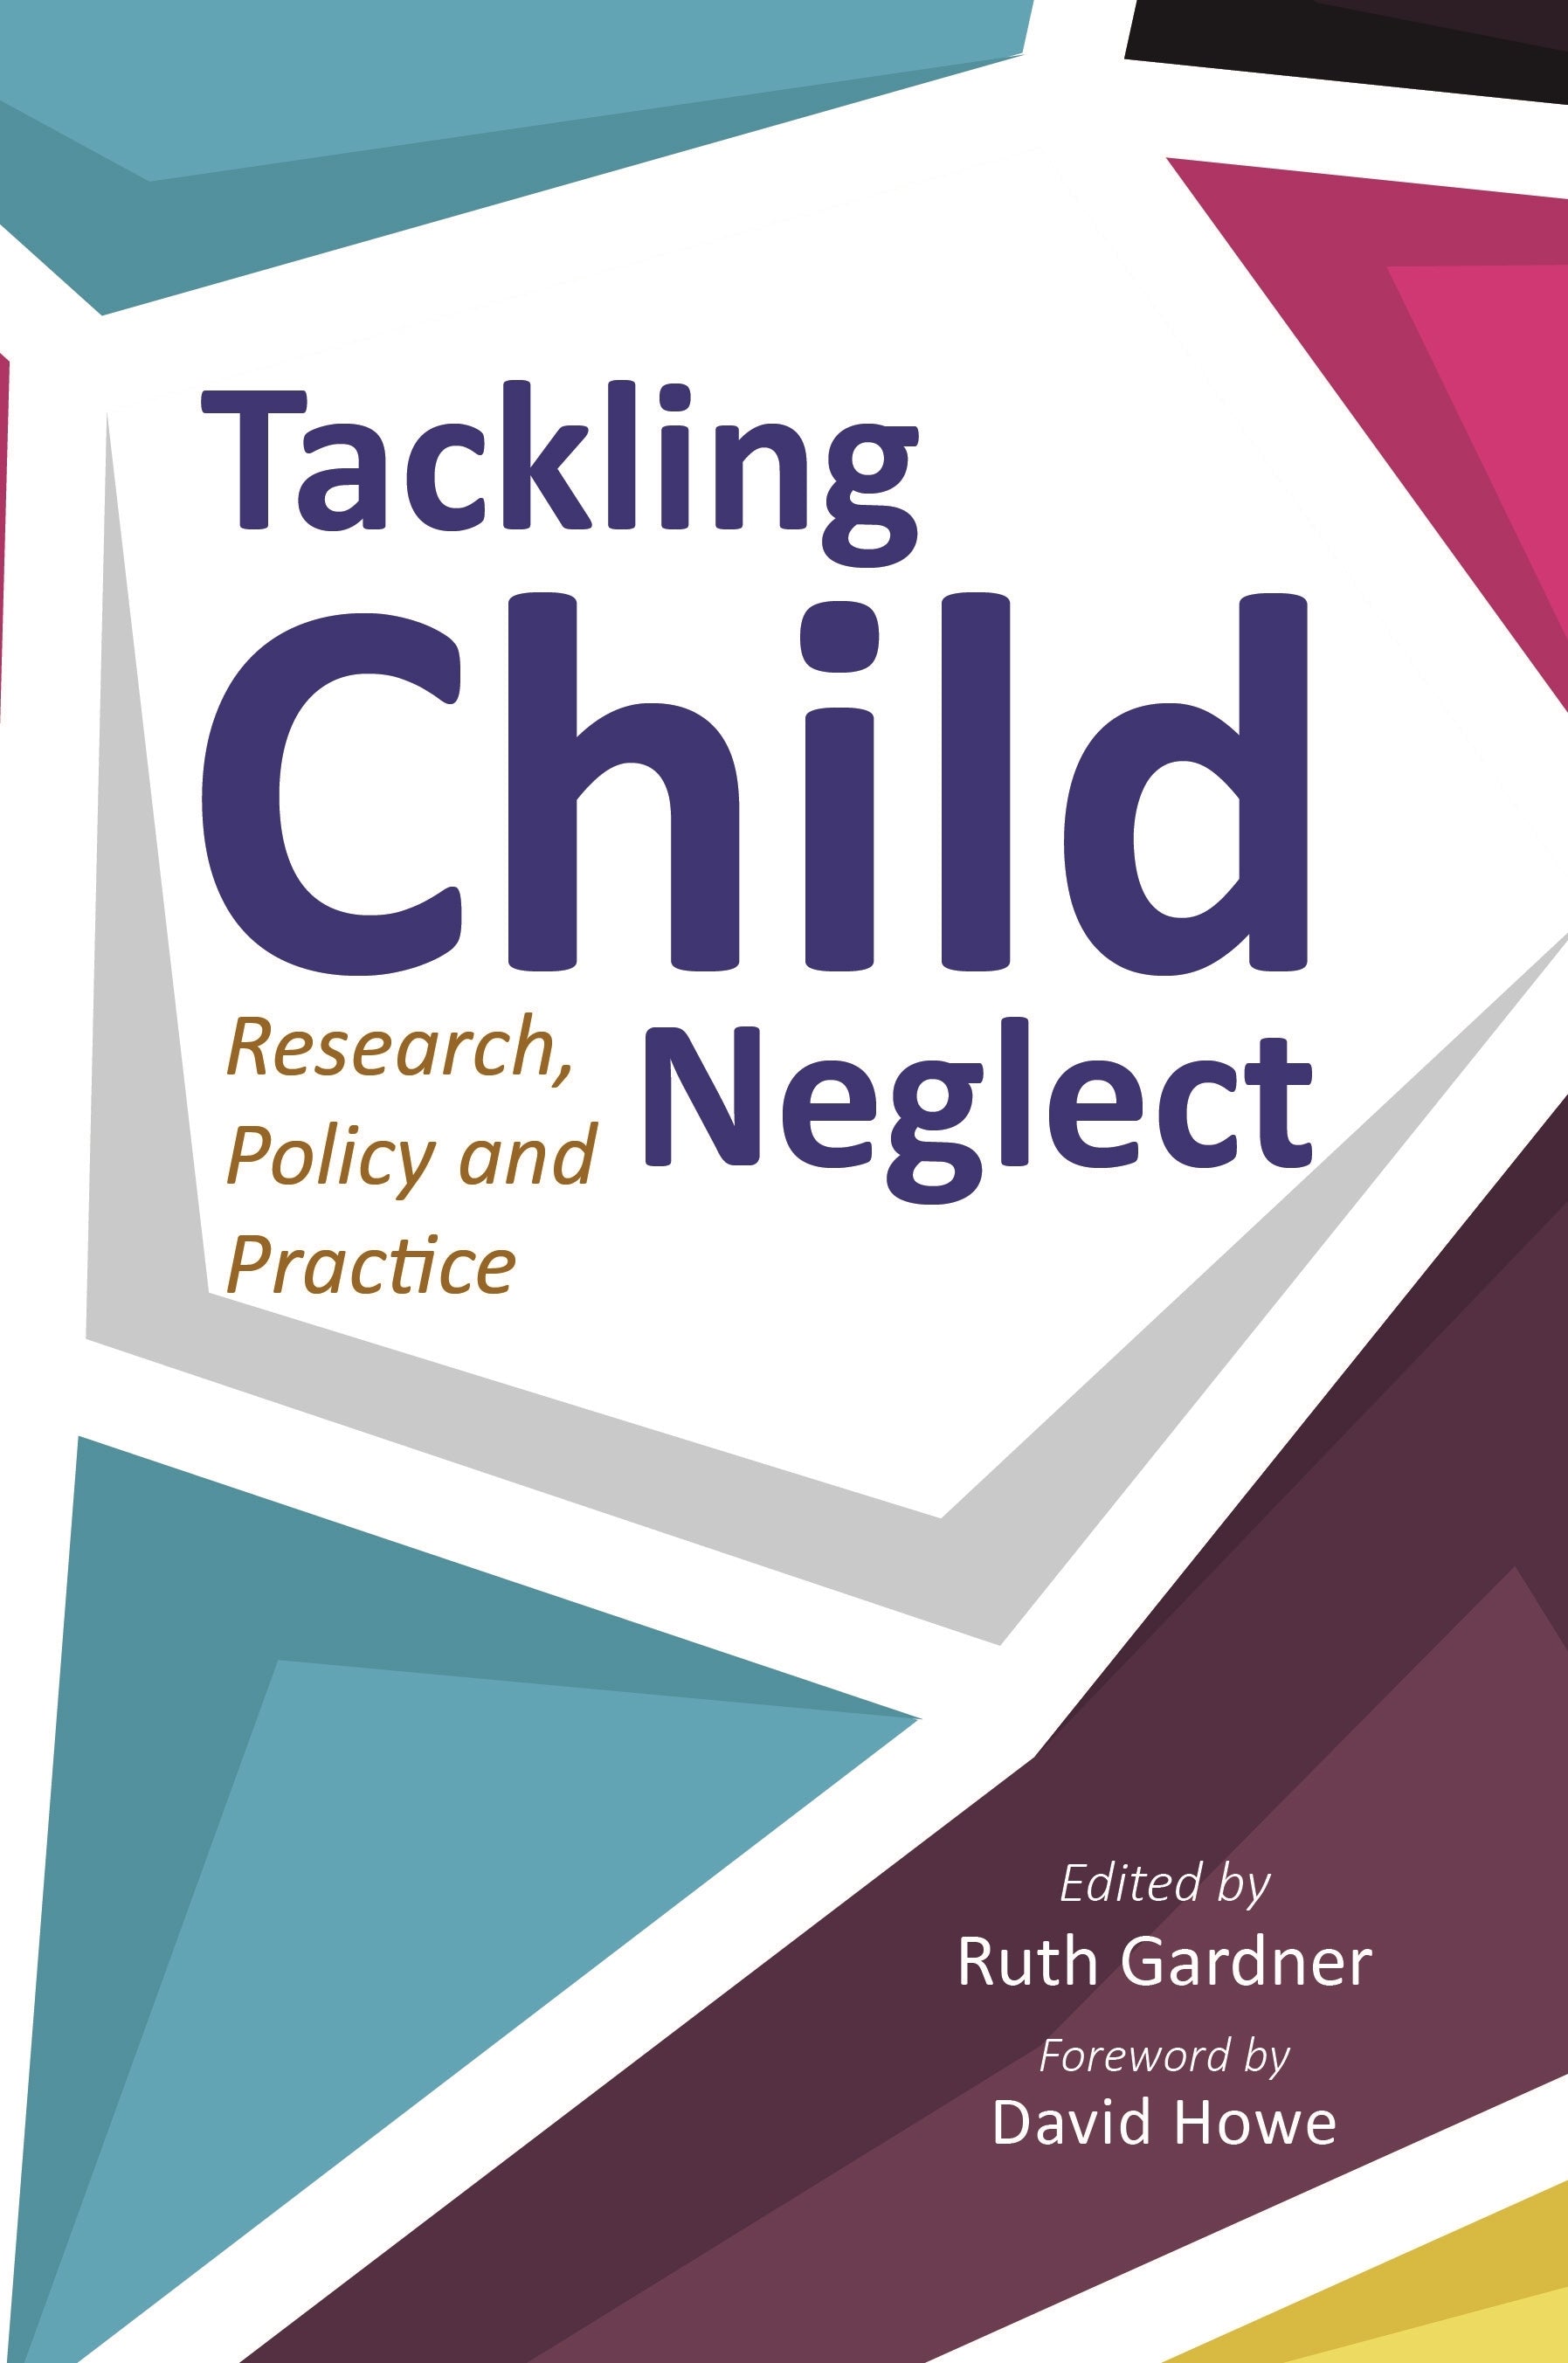 Tackling Child Neglect by No Author Listed, Ruth Gardner, David Howe